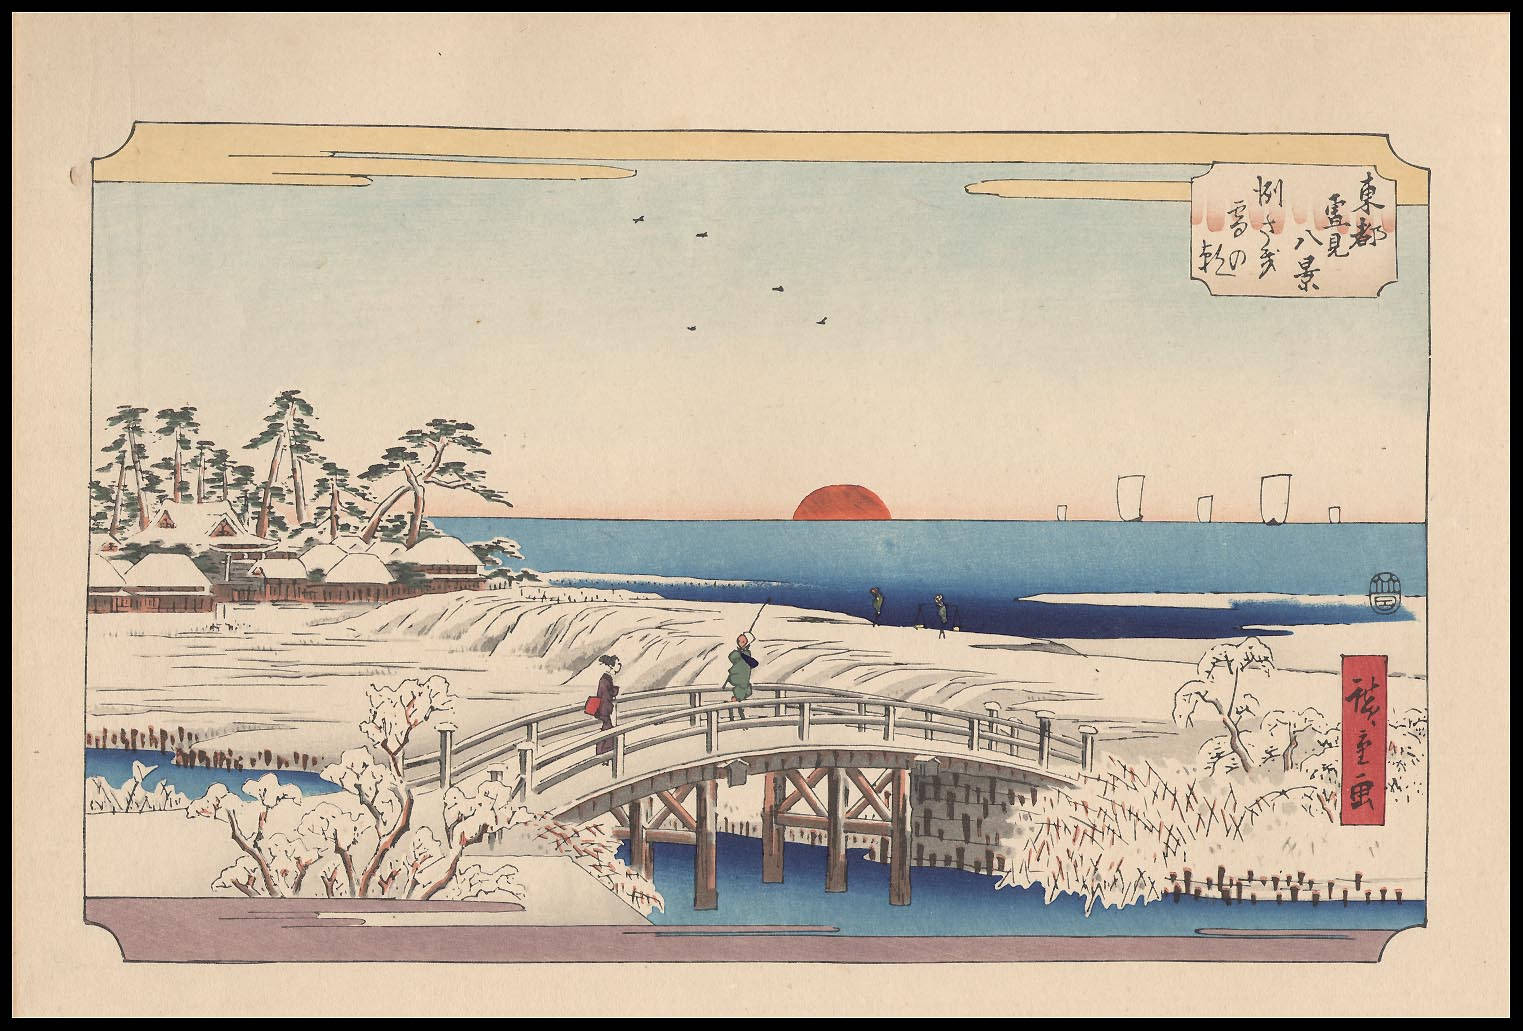 Decorative View Of A Japanese Village Wallpaper